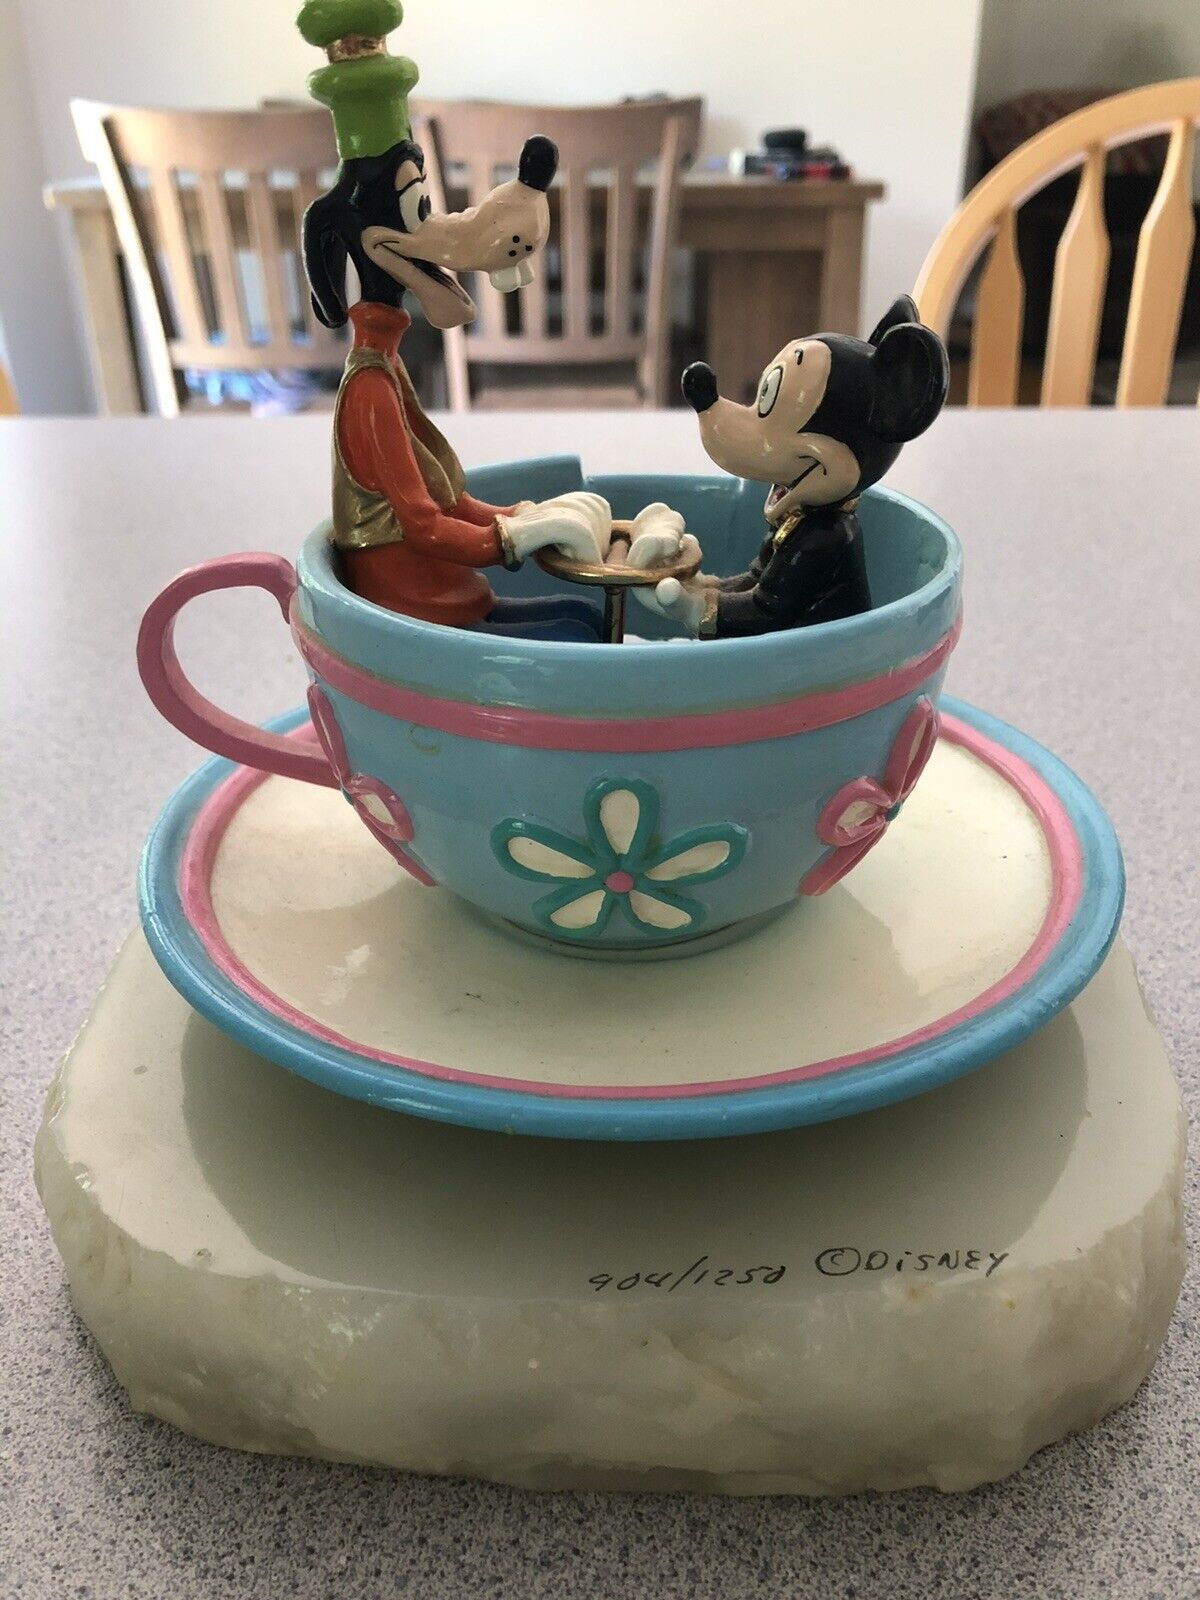 Disney’s Ron Lee Sculpture “Mickey’s Teacup Ride” 1994 Limited Edition 